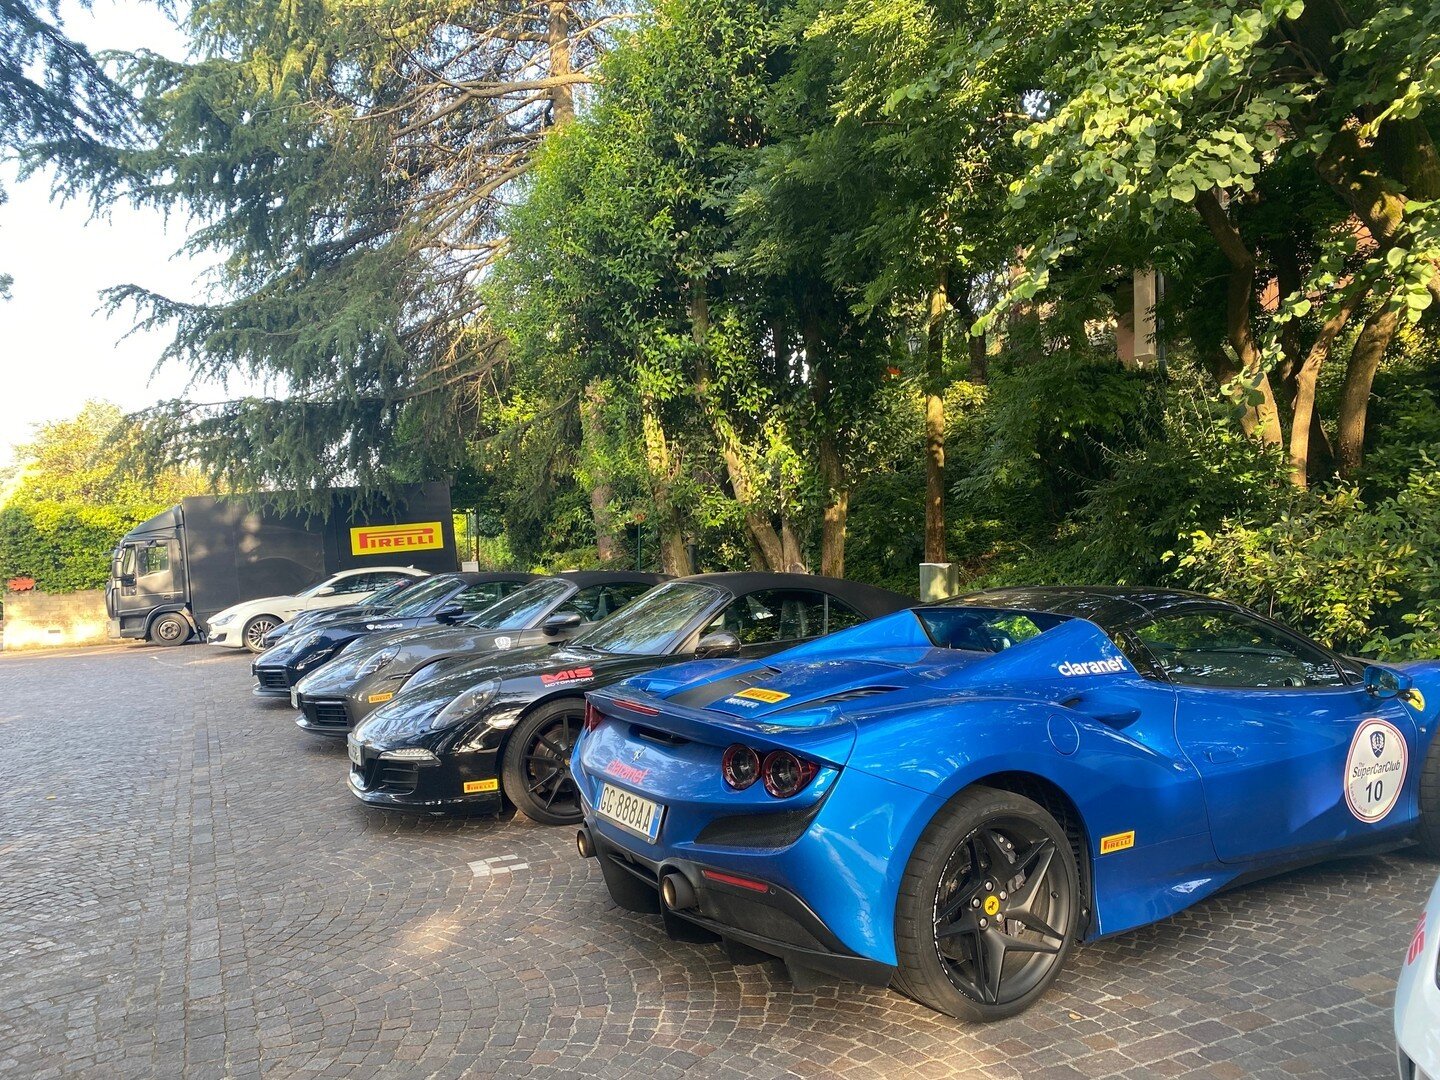 Our wonderful sponsors @pirelli follow ur routes each year to ensure peace of mind for our members - we couldn't do it without them! 🇮🇹⁠
⁠
⁠
#supercar #supercars #SupercarLifestyle #SupercarsBuzz #supercarspotting #SuperCarSunday #supercarseurope #